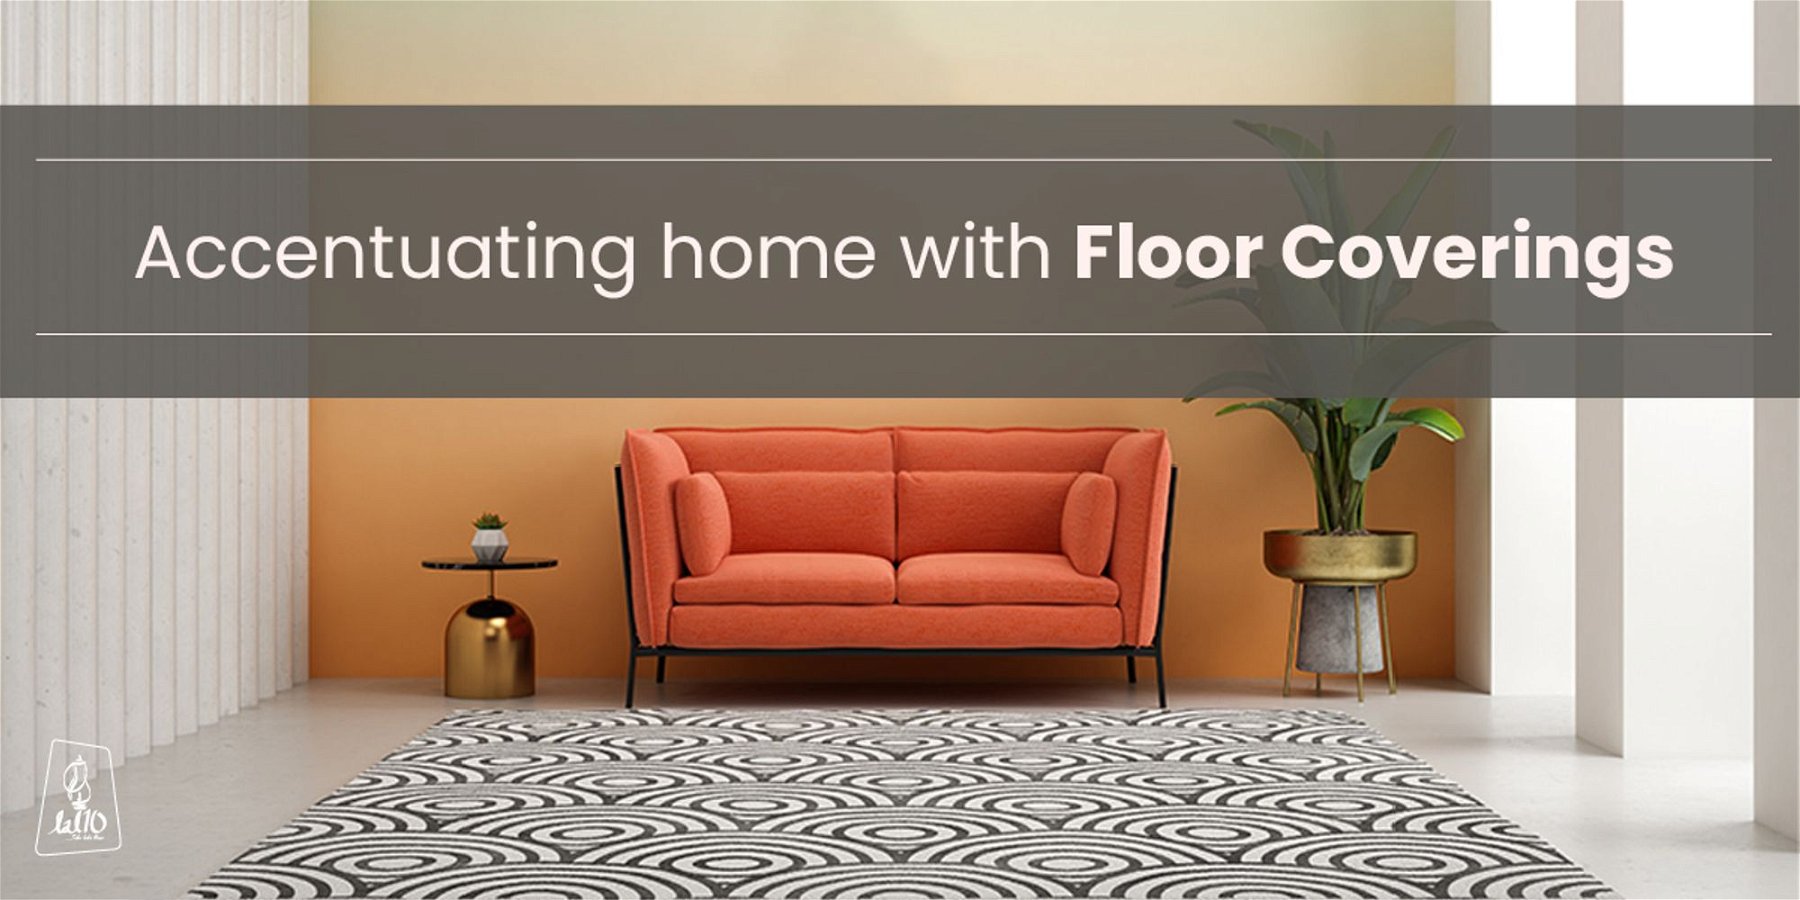 Accentuating home with floor coverings